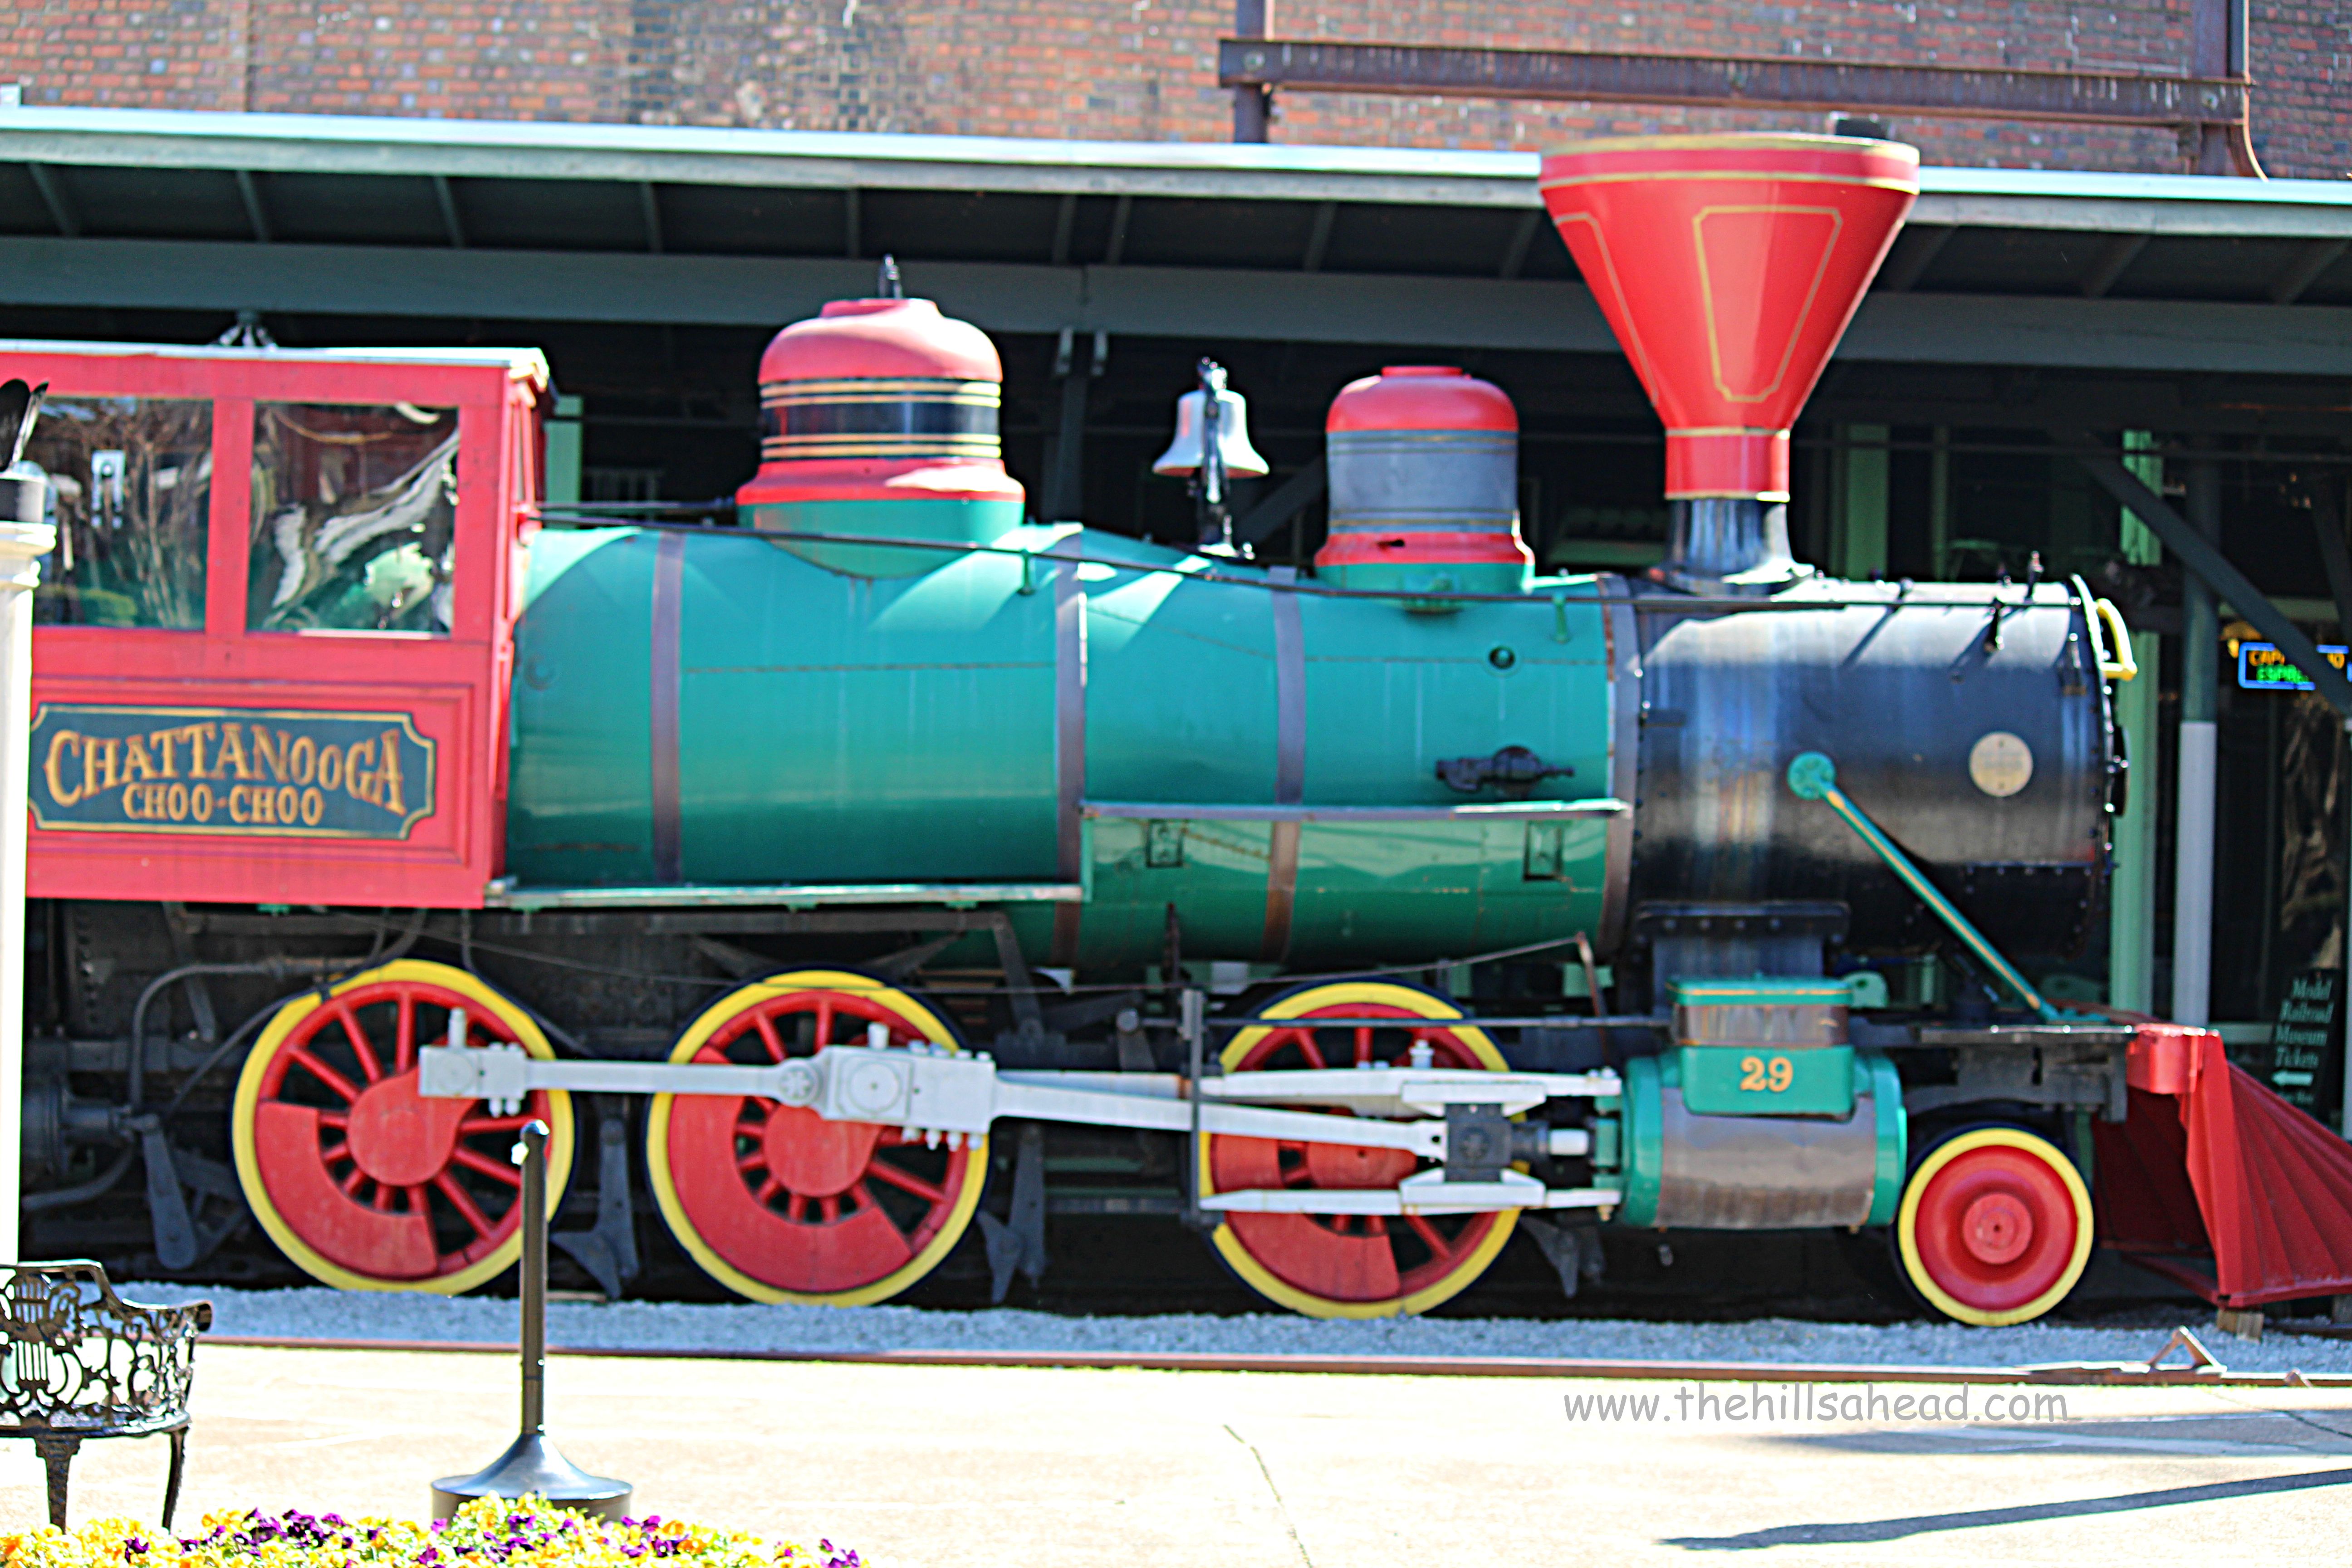 The Chattanooga Choo-Choo: A Stop Back in Time | The Hills Ahead